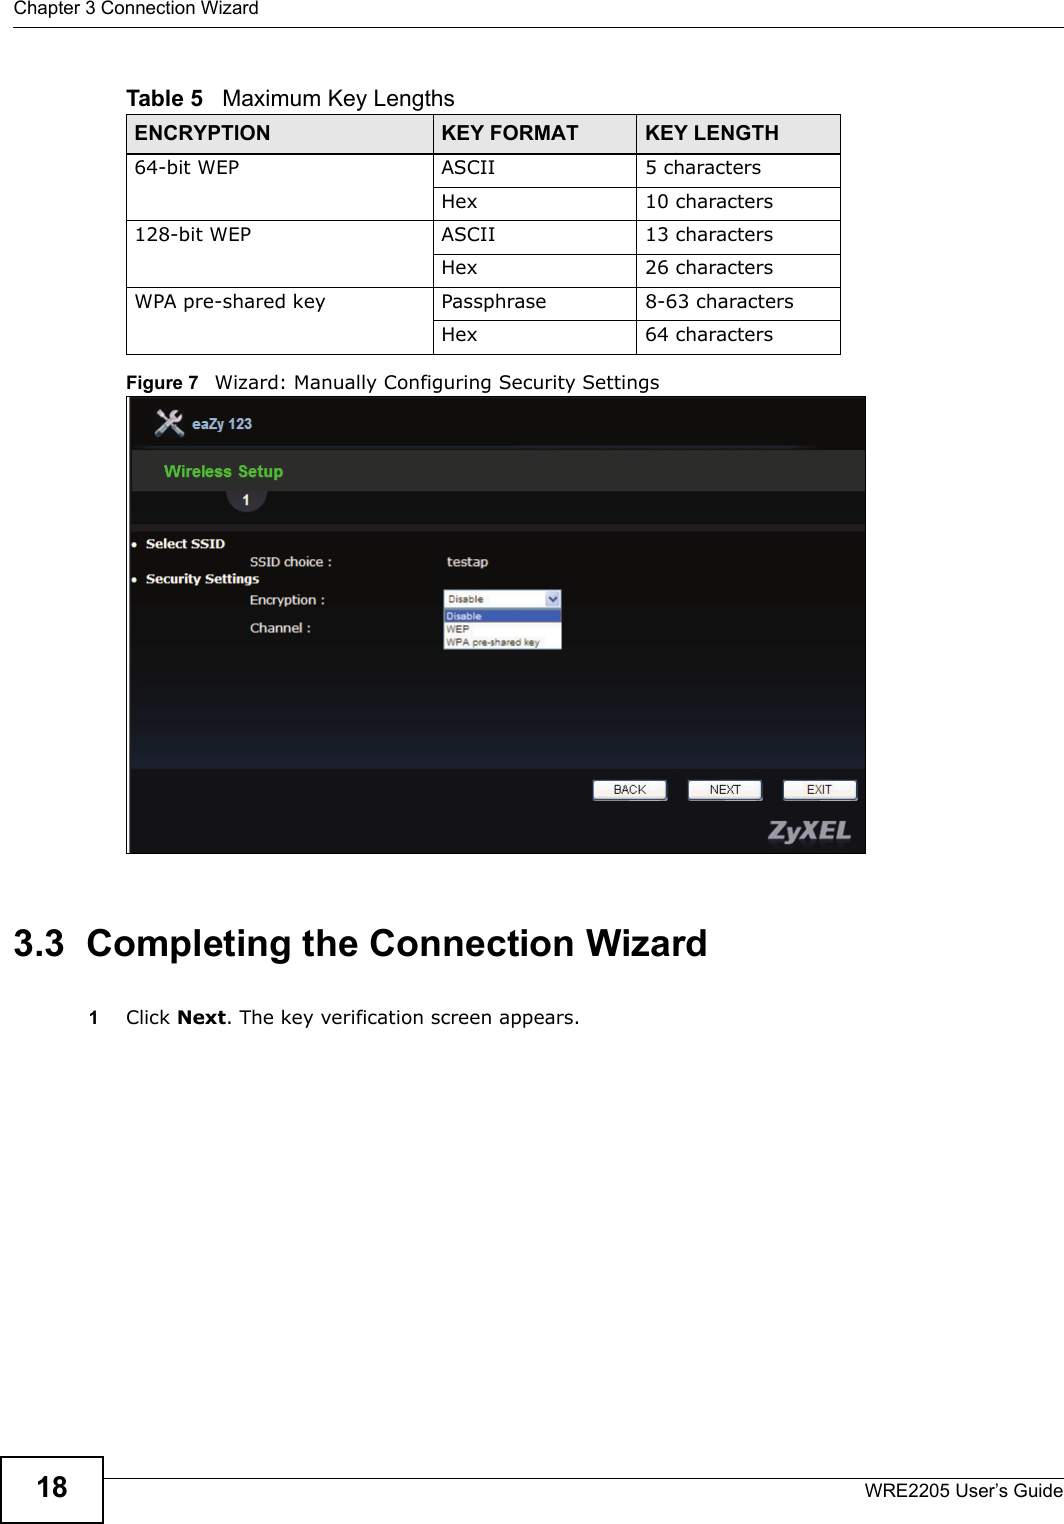 Chapter 3 Connection WizardWRE2205 User’s Guide18Figure 7   Wizard: Manually Configuring Security Settings3.3  Completing the Connection Wizard1Click Next. The key verification screen appears.Table 5   Maximum Key LengthsENCRYPTION KEY FORMAT KEY LENGTH64-bit WEP ASCII 5 charactersHex 10 characters128-bit WEP ASCII 13 charactersHex 26 charactersWPA pre-shared key Passphrase 8-63 charactersHex 64 characters